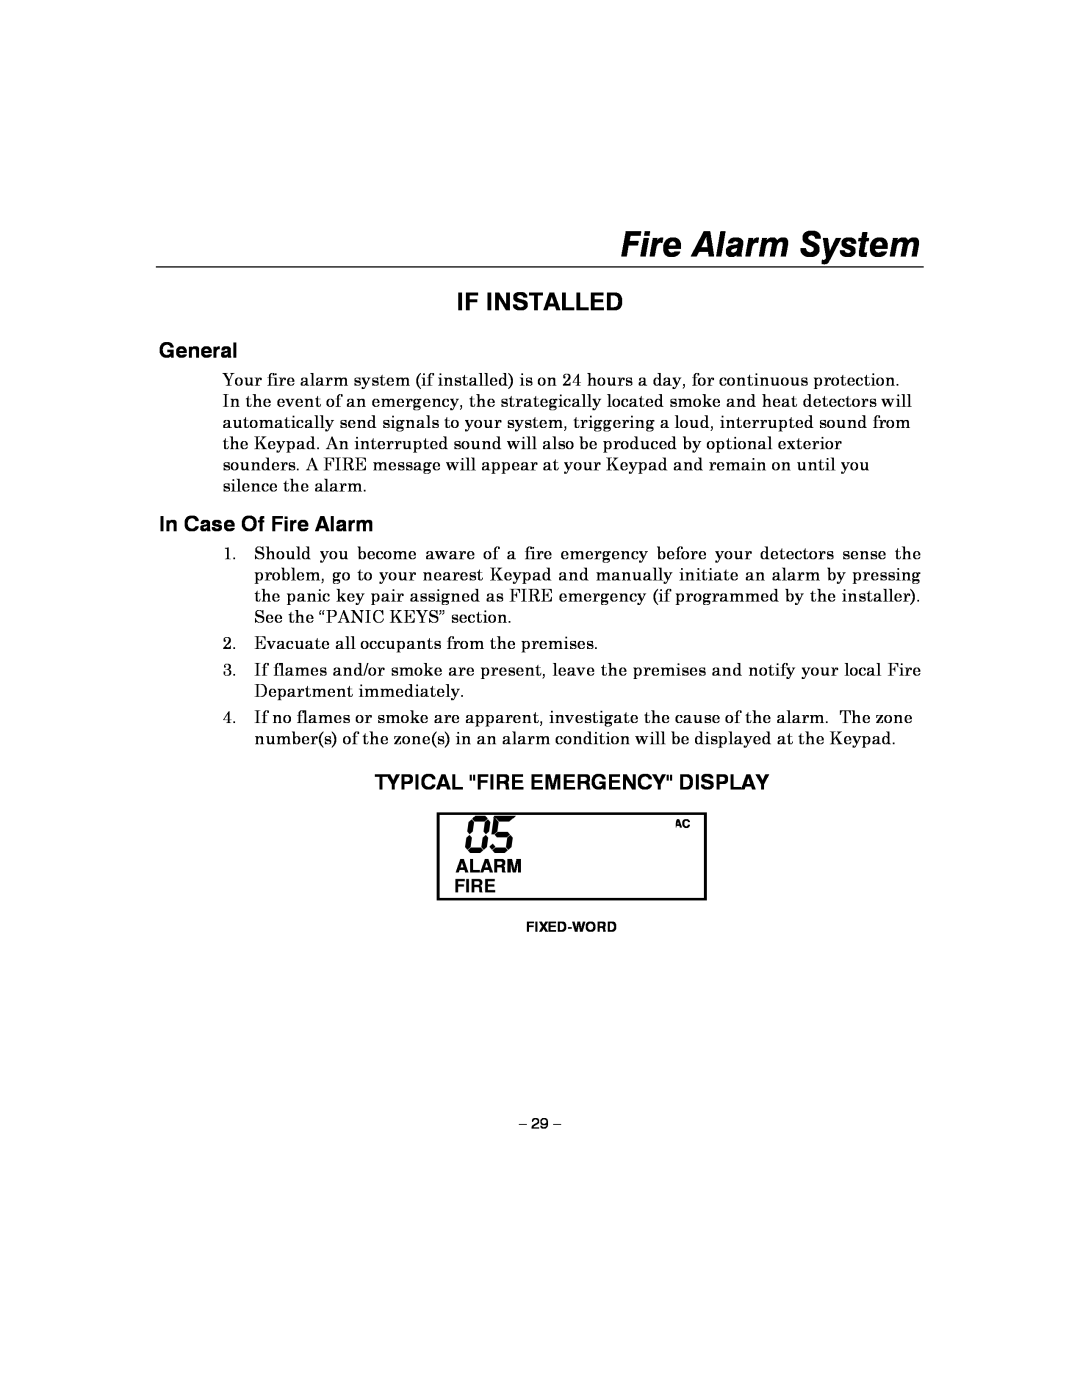 Honeywell 4110XM manual Fire Alarm System, If Installed, In Case Of Fire Alarm, Typical Fire Emergency Display, General 